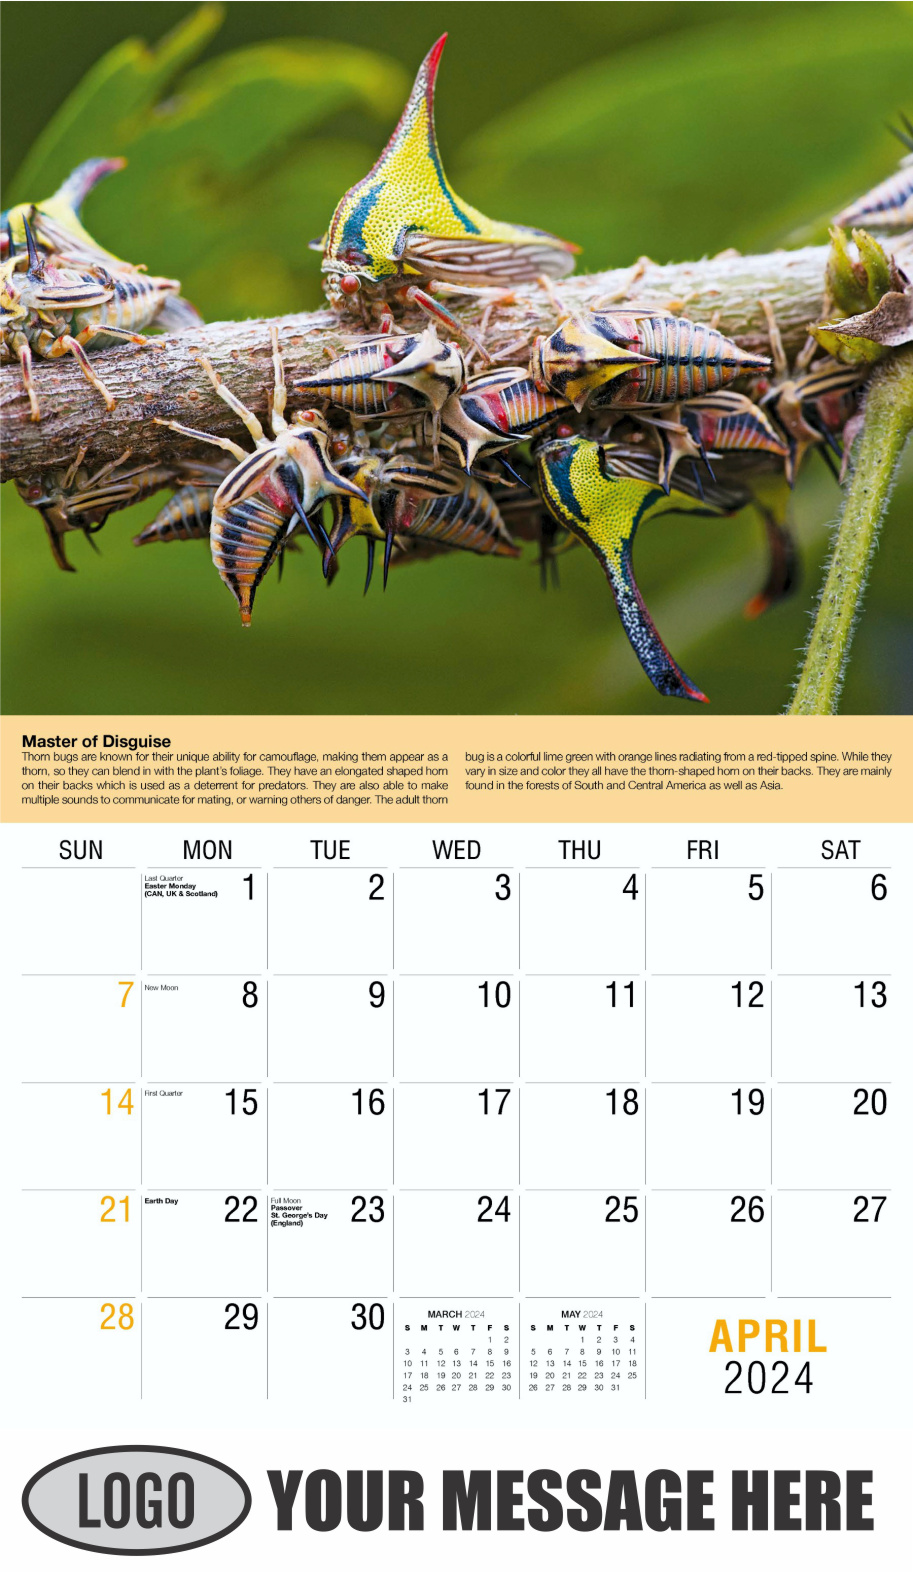 Planet Earth 2024 Business Promotional Wall Calendar - April